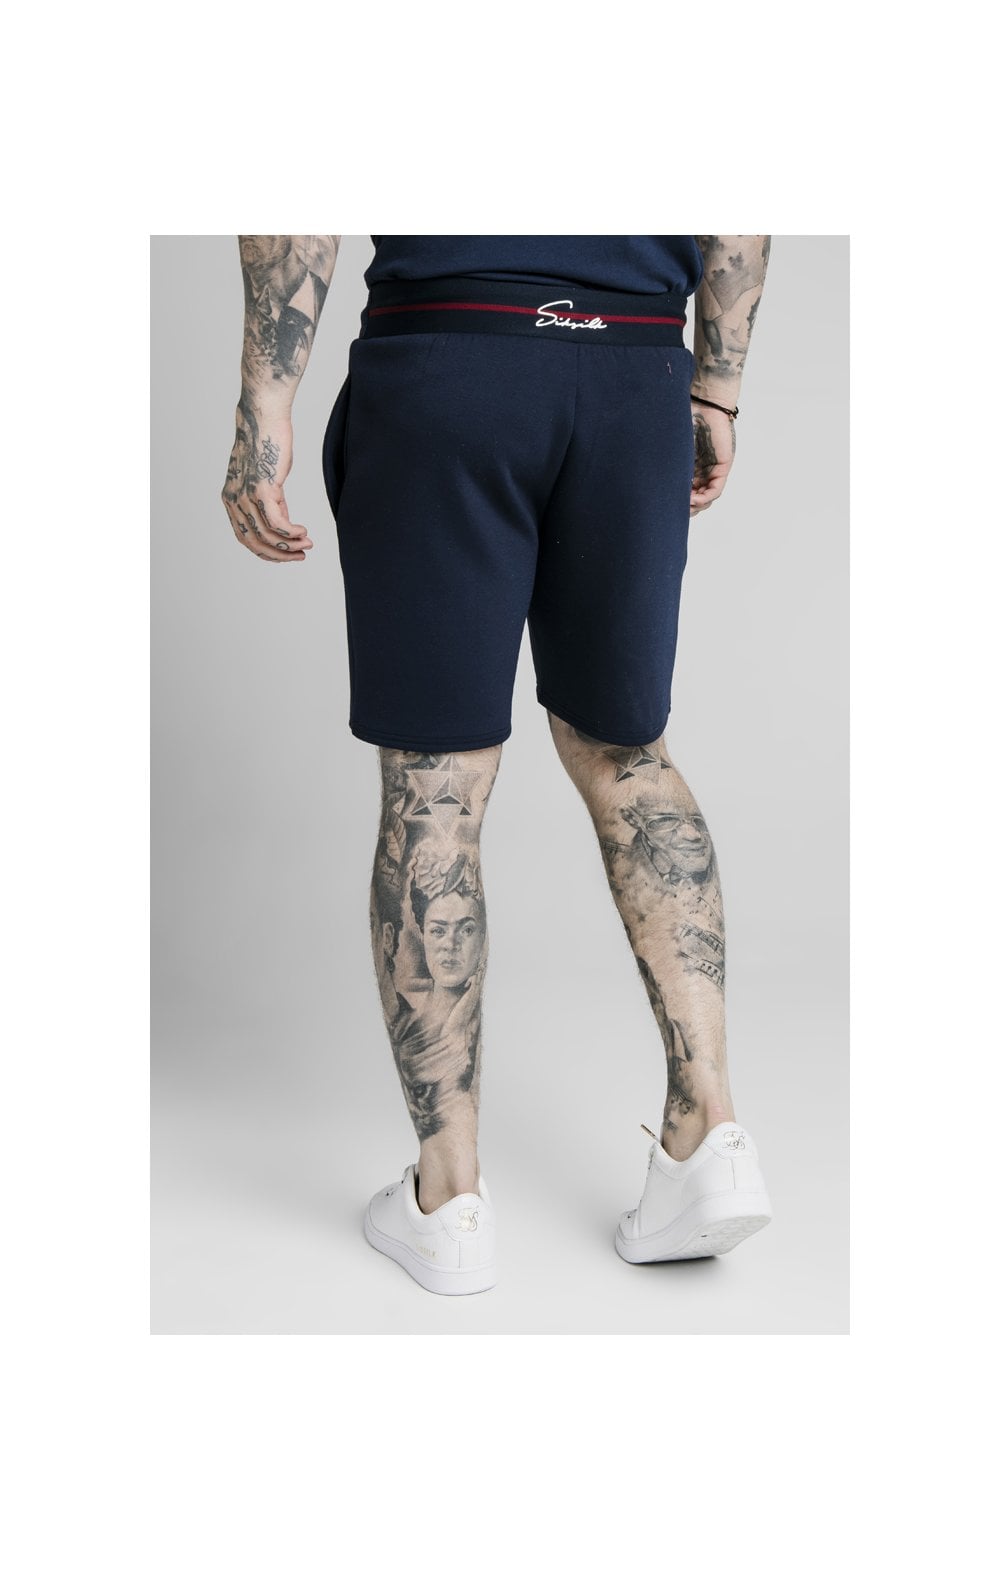 Load image into Gallery viewer, SikSilk Exposed Tape Shorts - Navy (1)